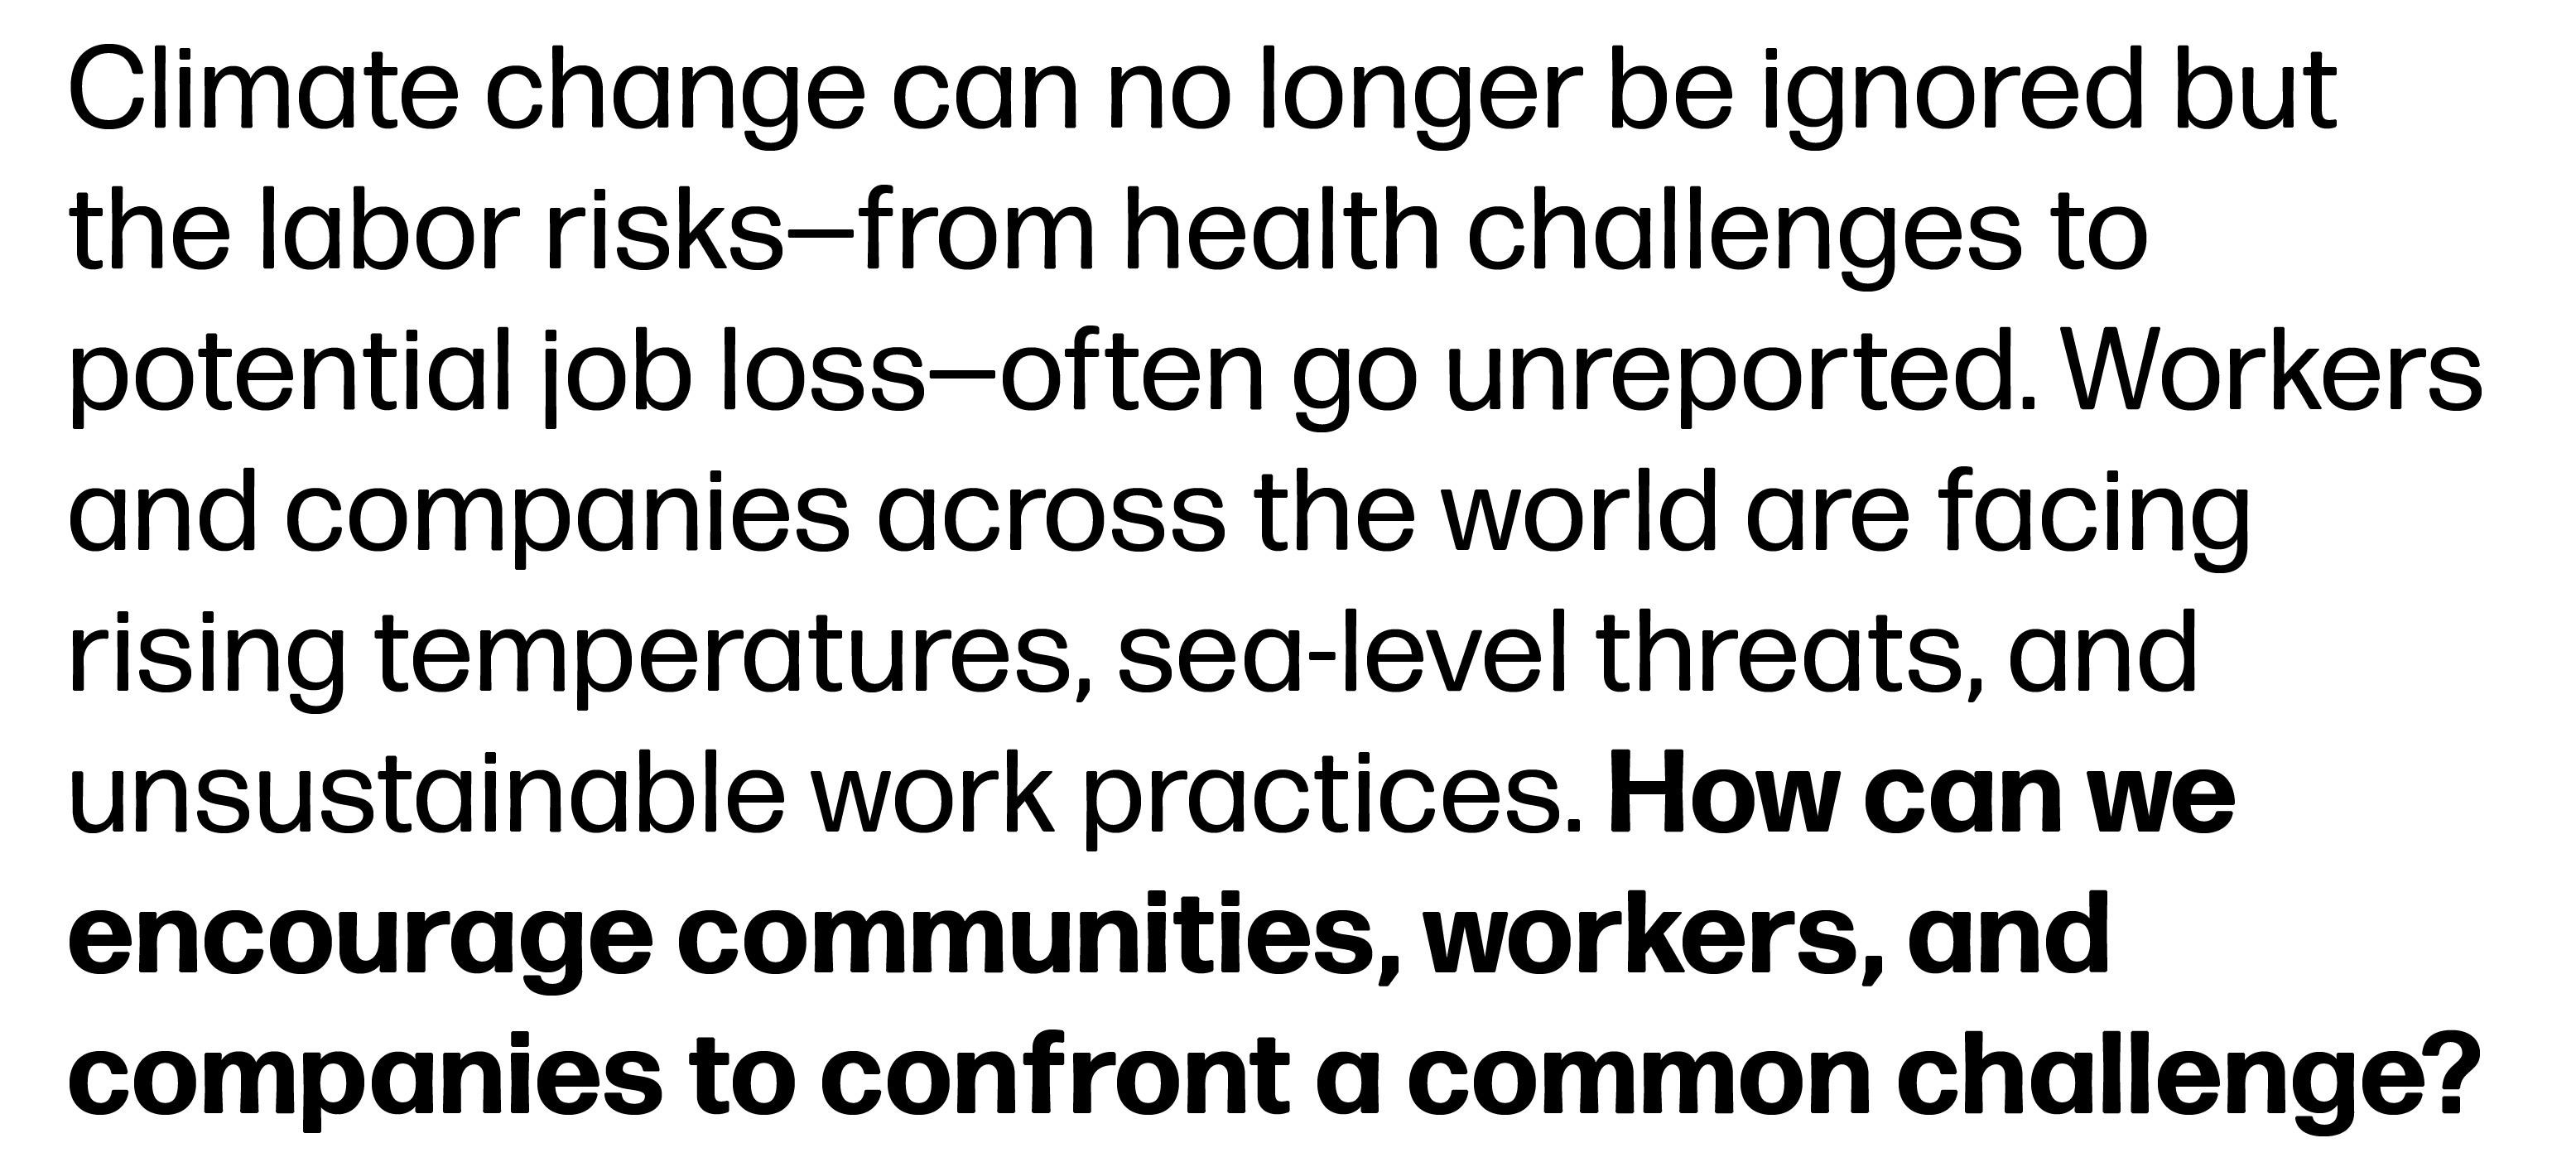 Climate change can no longer be ignored but the labor risks—from health challenges to potential job loss—often go unreported. Workers and companies across the world are facing rising temperatures, sea-level threats, and unsustainable work practices. How can we encourage communities, workers, and companies to confront a common challenge?